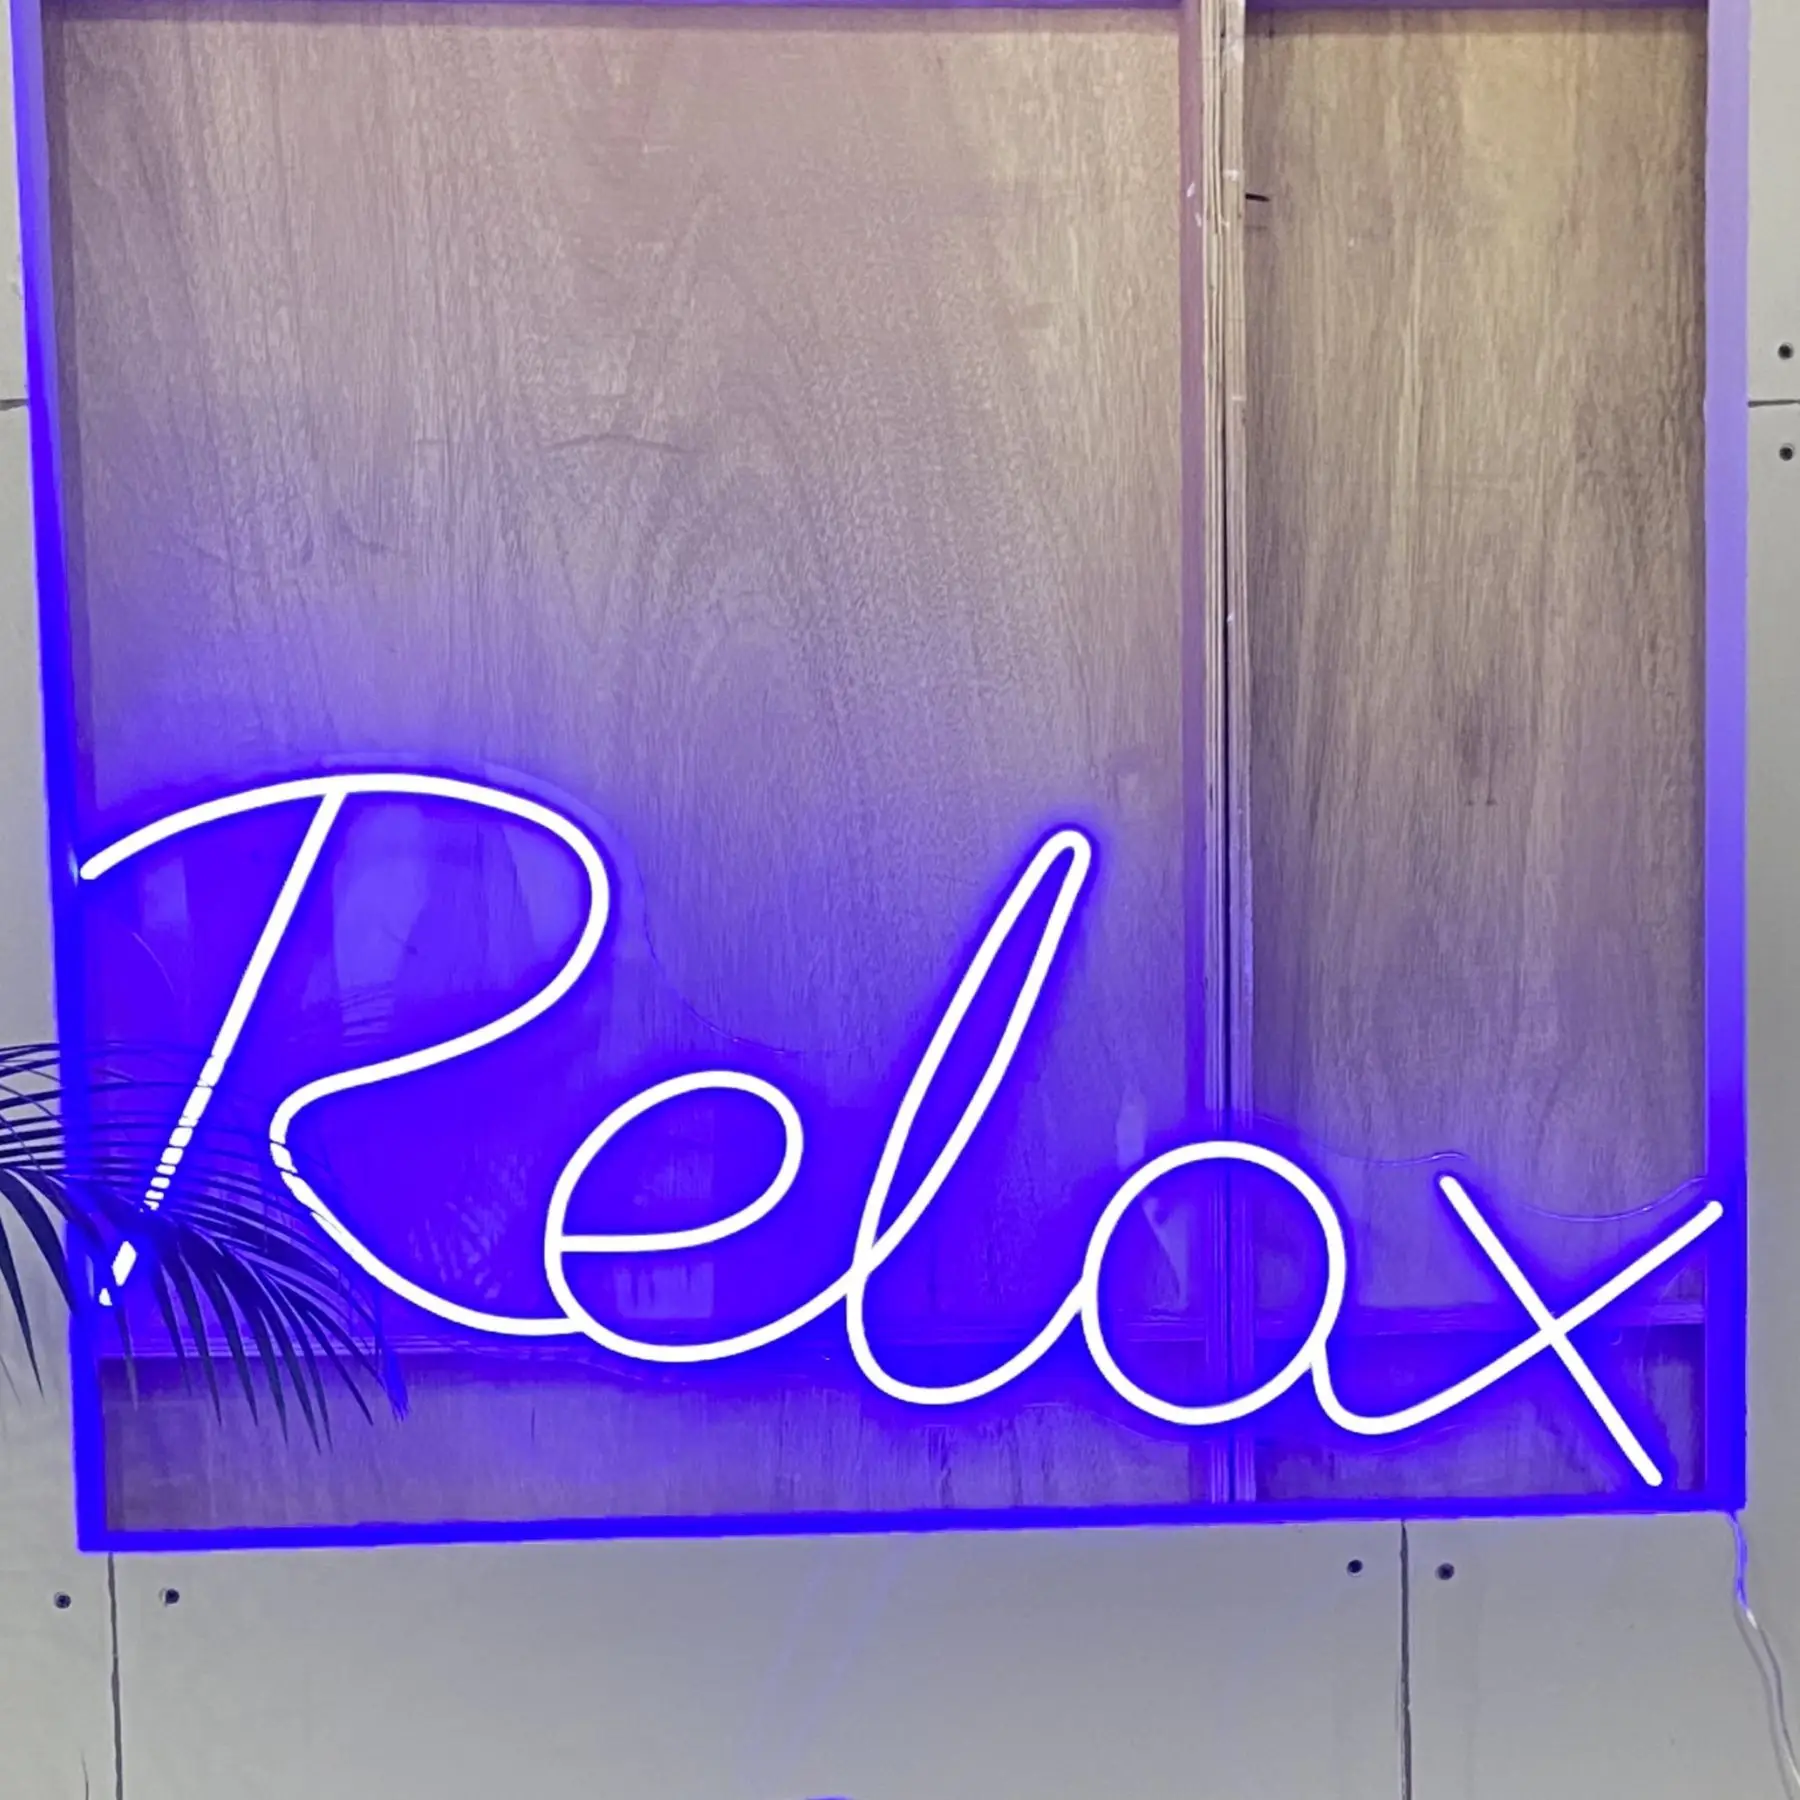 Relax LED Neon Light Signs for Room/Bar Decor,Birthday Gifts,Game Room, Living Room,with Different Custom Size&Color Neon Signs